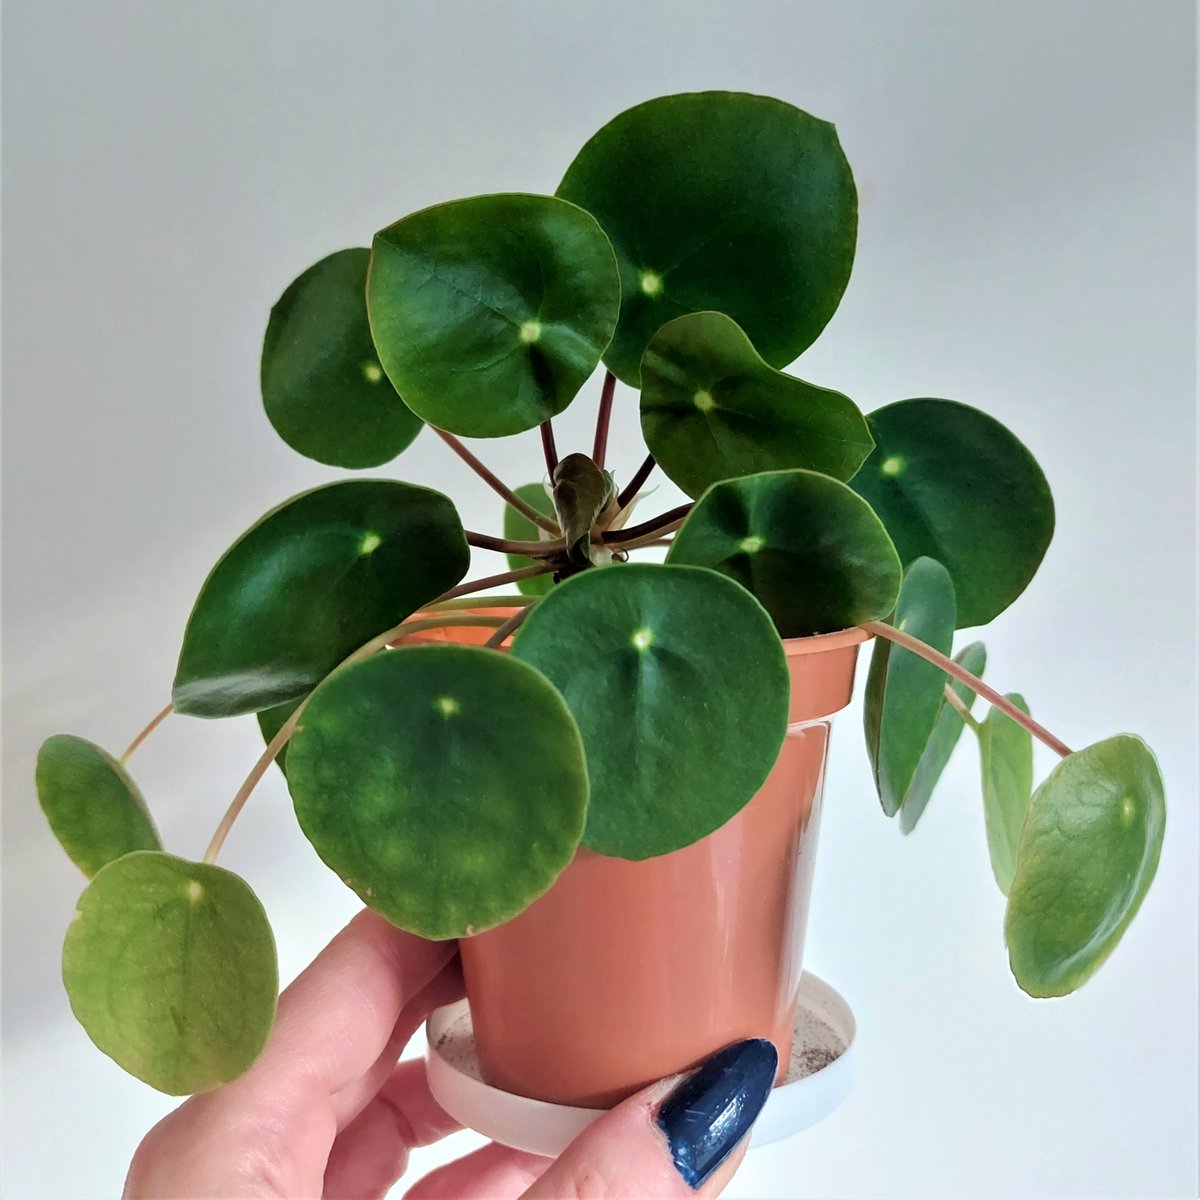 Pilea of the day is little Ivan, who grew out of his momma’s pot drainage hole! #pilea #peperomioides #pileapeperomioides #chinesemoneyplant #PlantTwitter #Houseplants